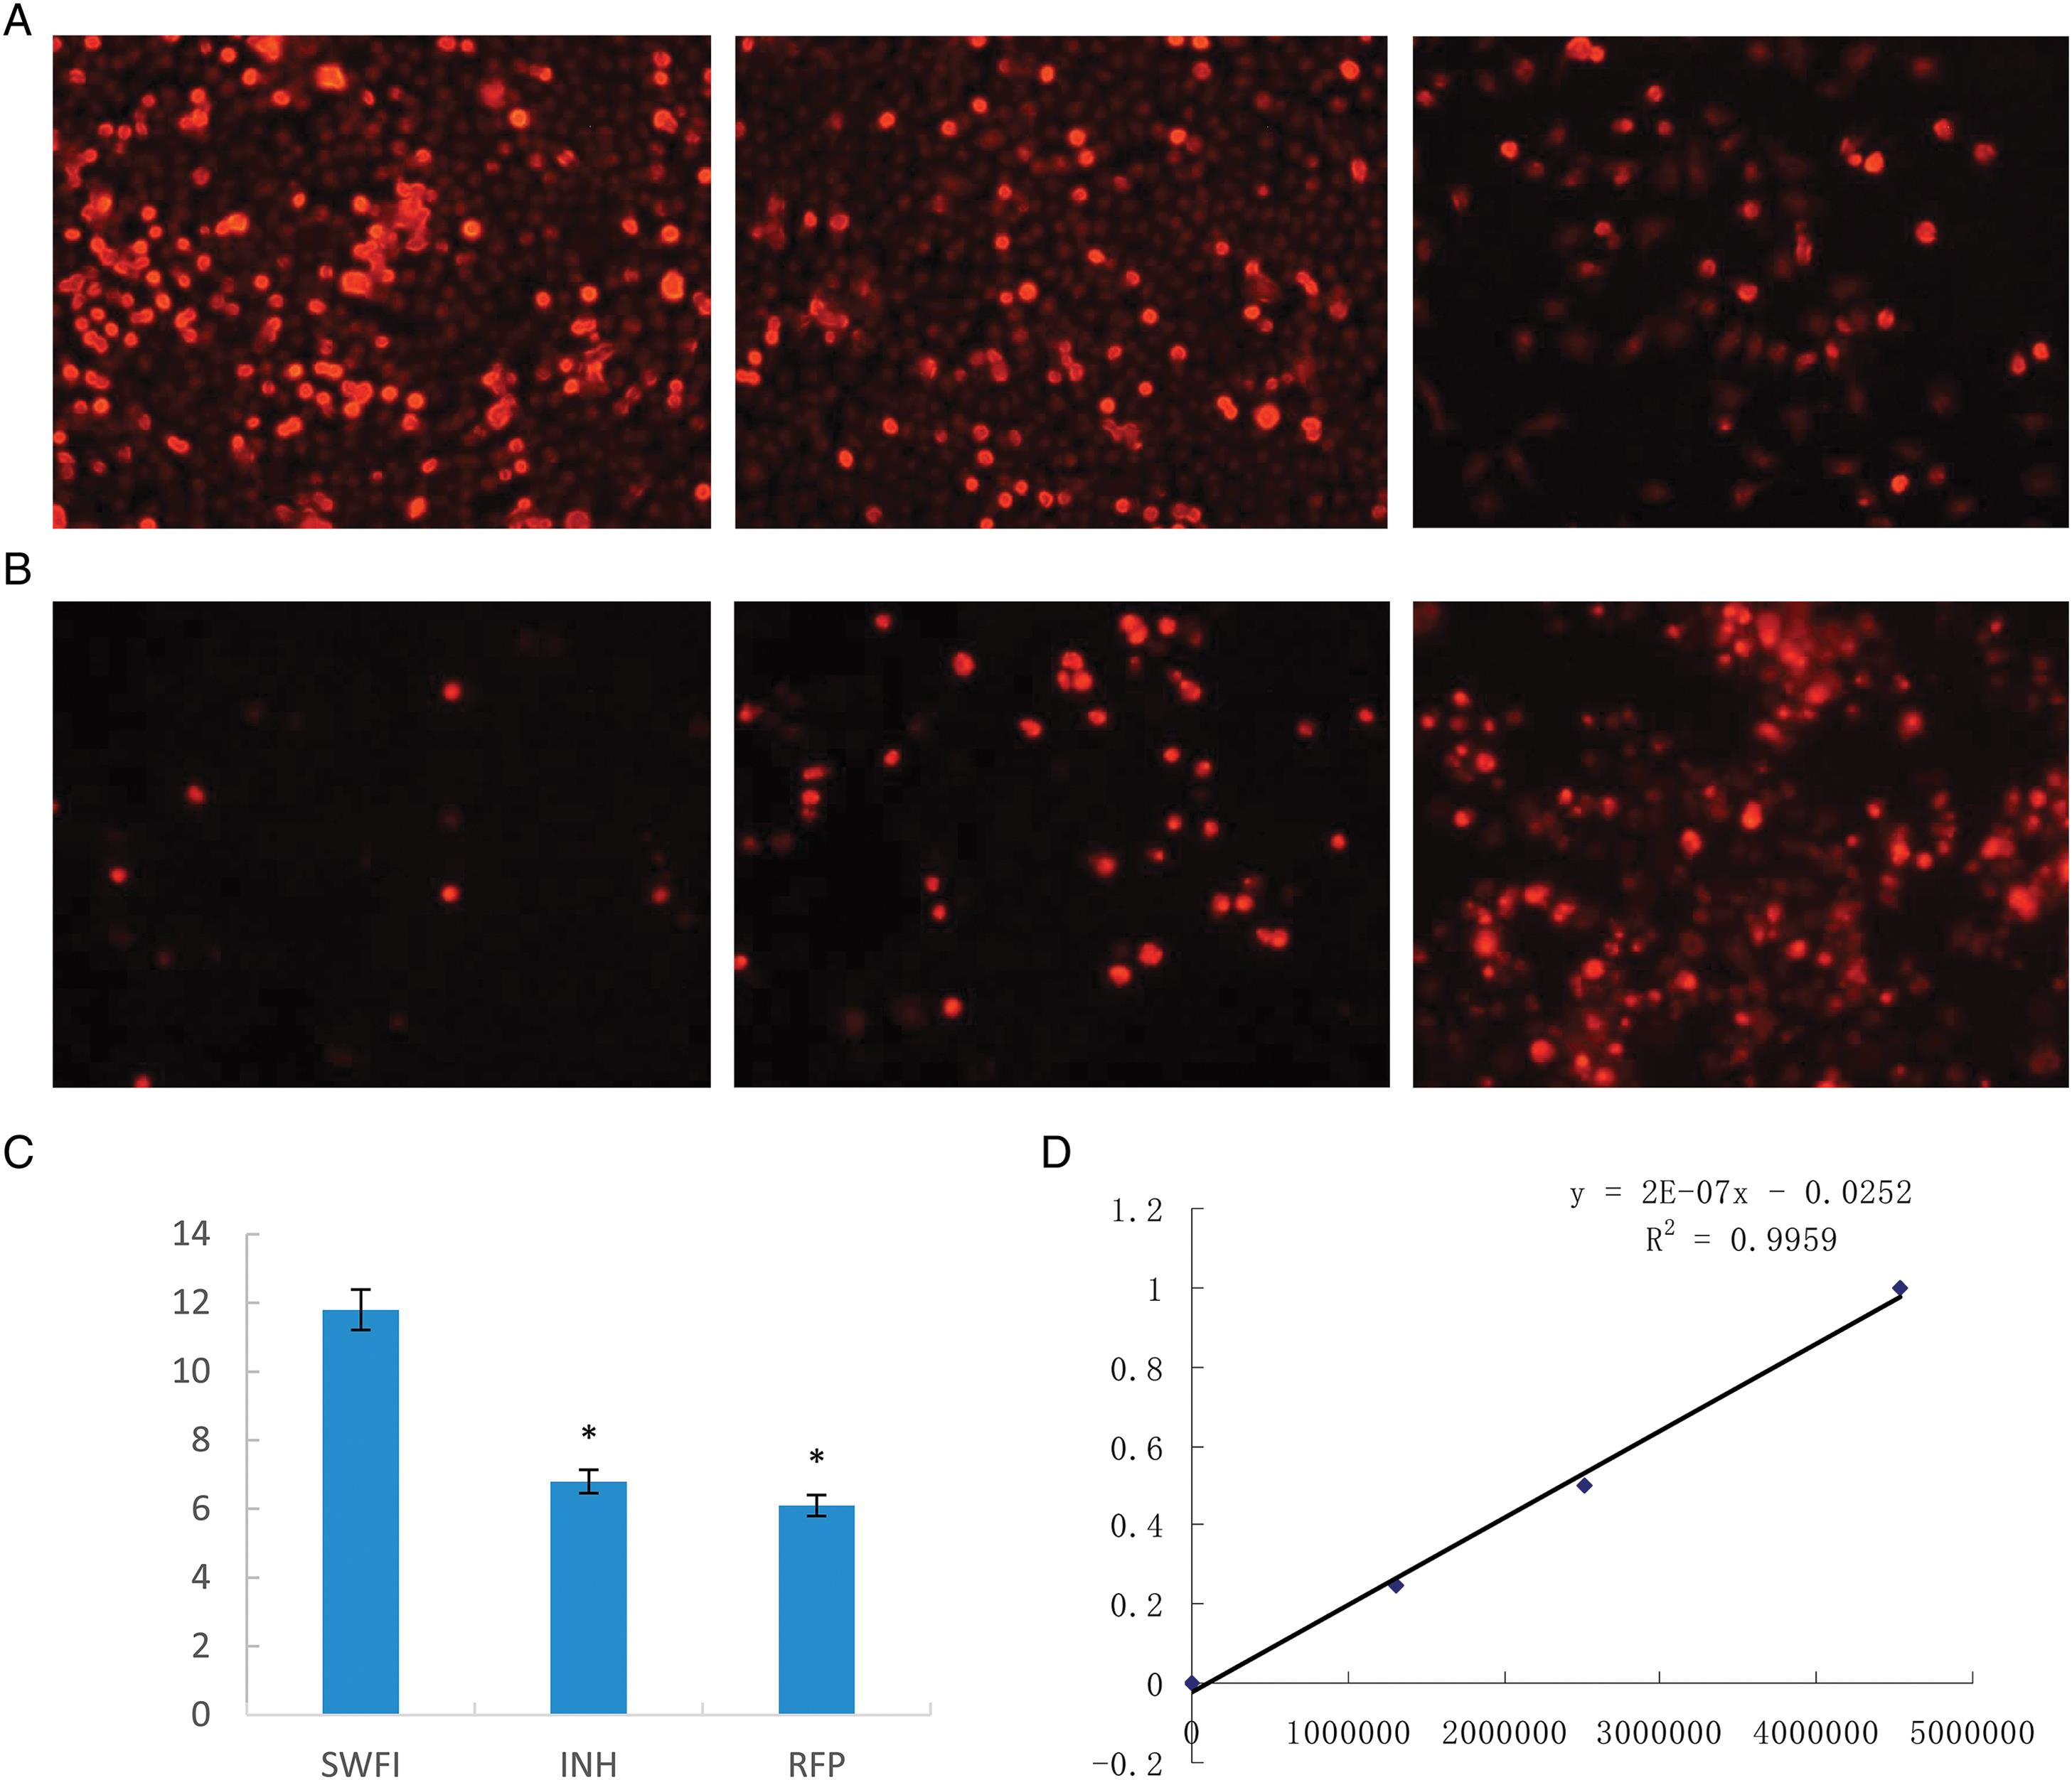 Toxicity effect on mitochondria in RFP- and INH-stimulated QSG7701 cells.